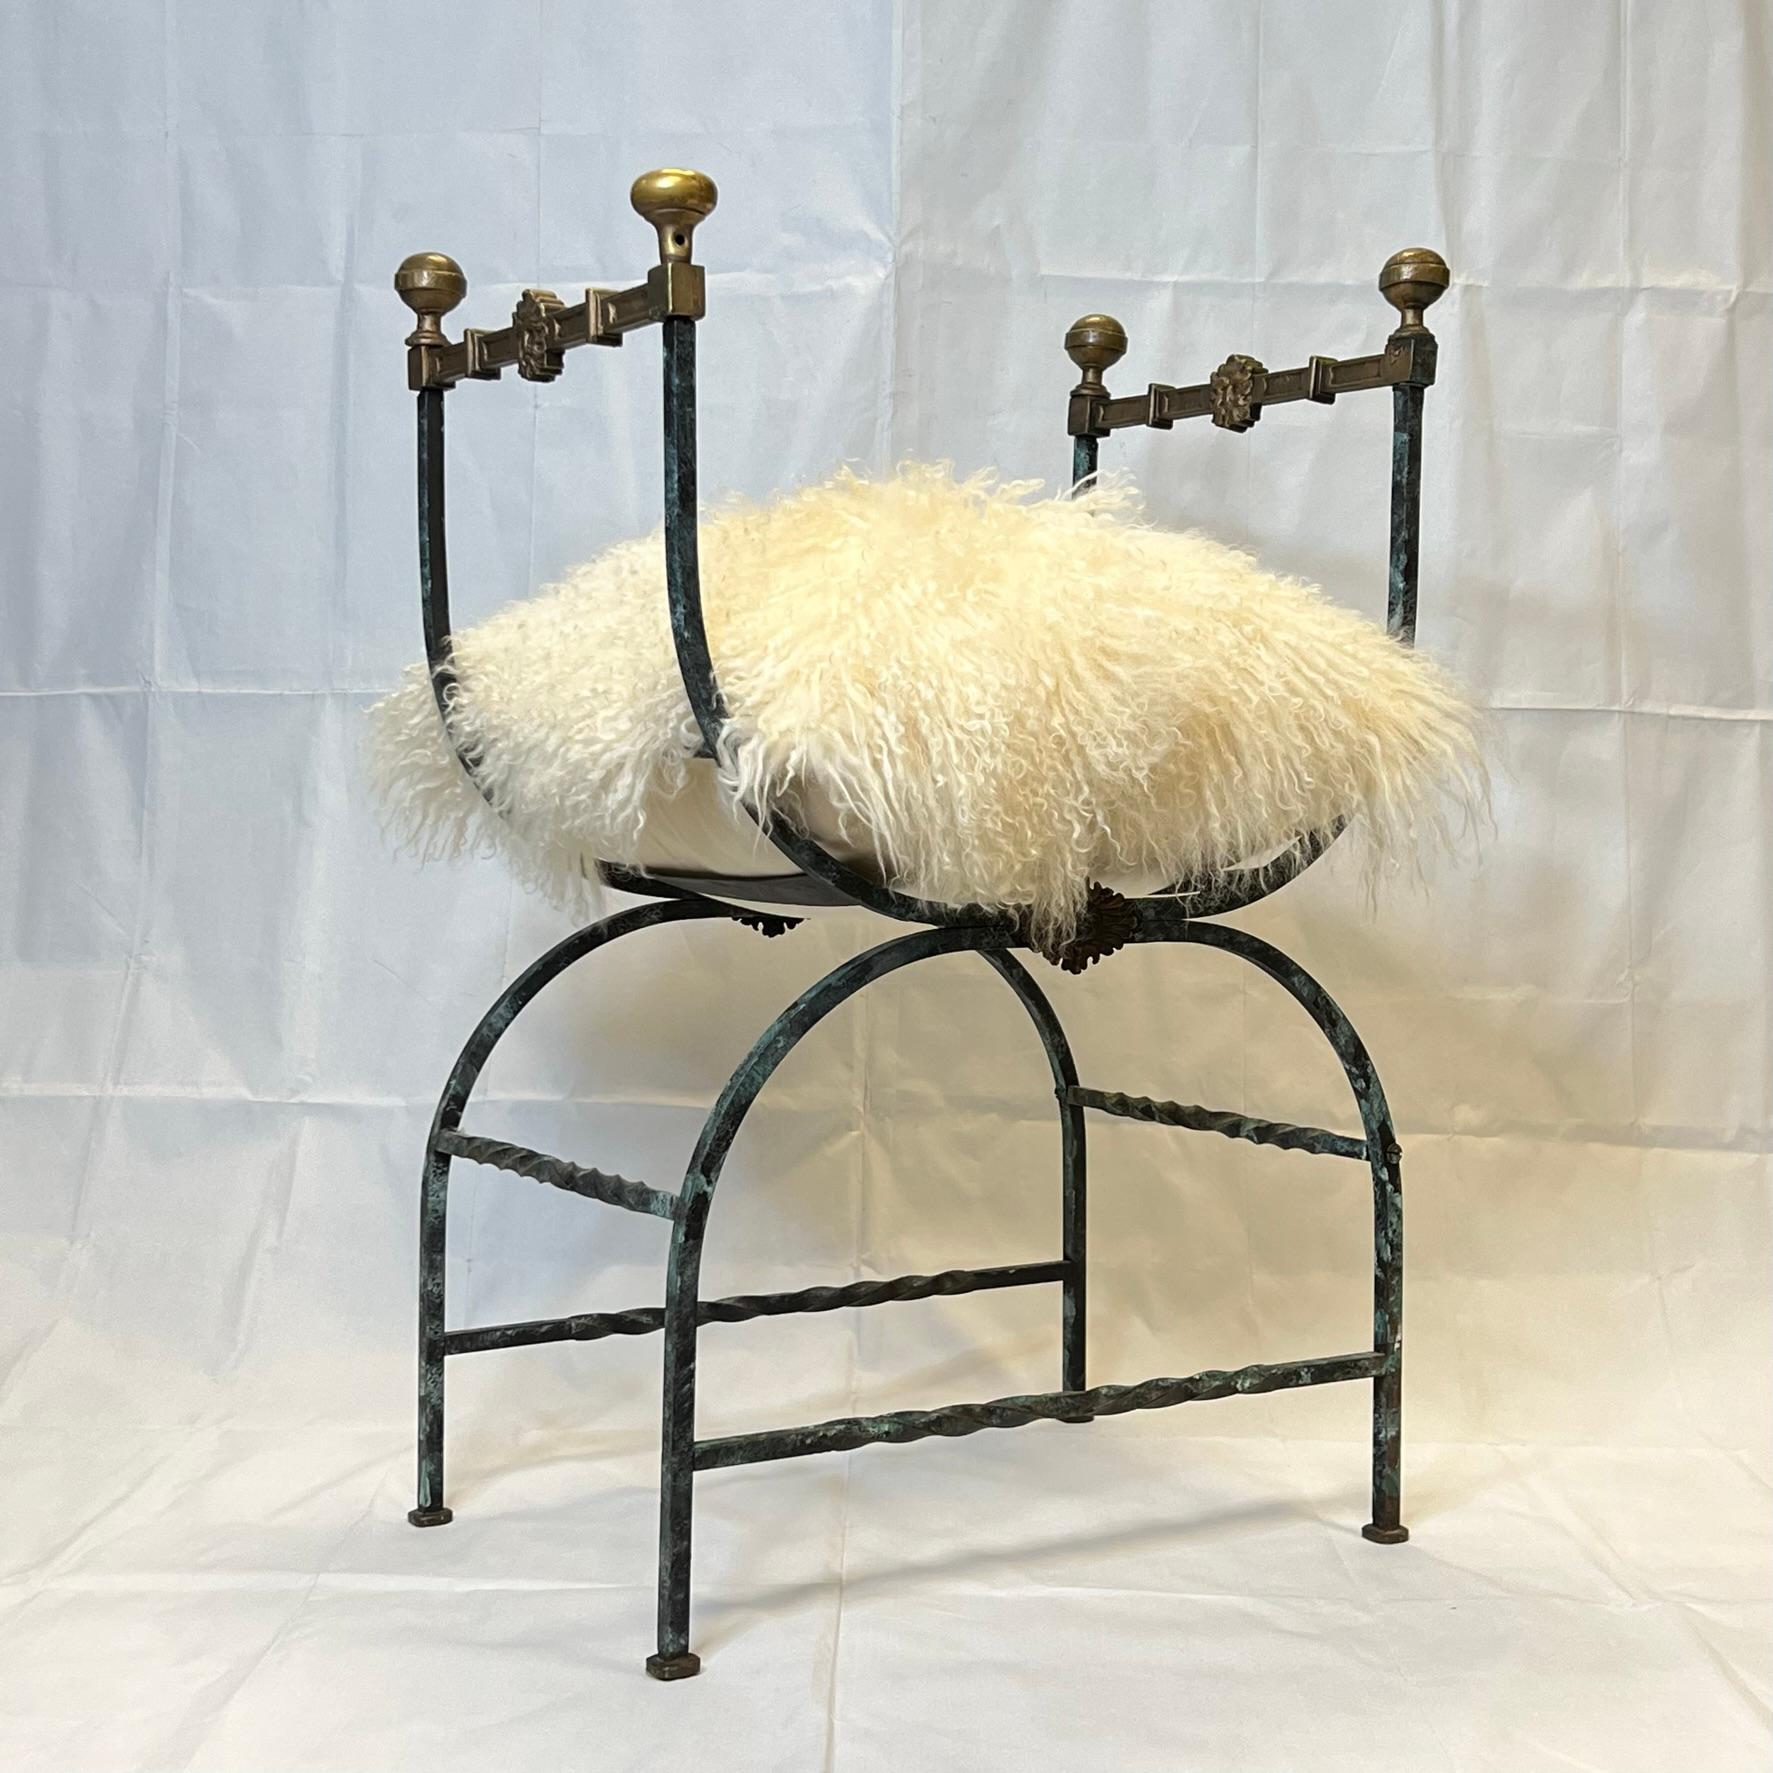 Renaissance Revival Wrought Iron Bench in Renaissance Style with Sheepskin Seat Cushion